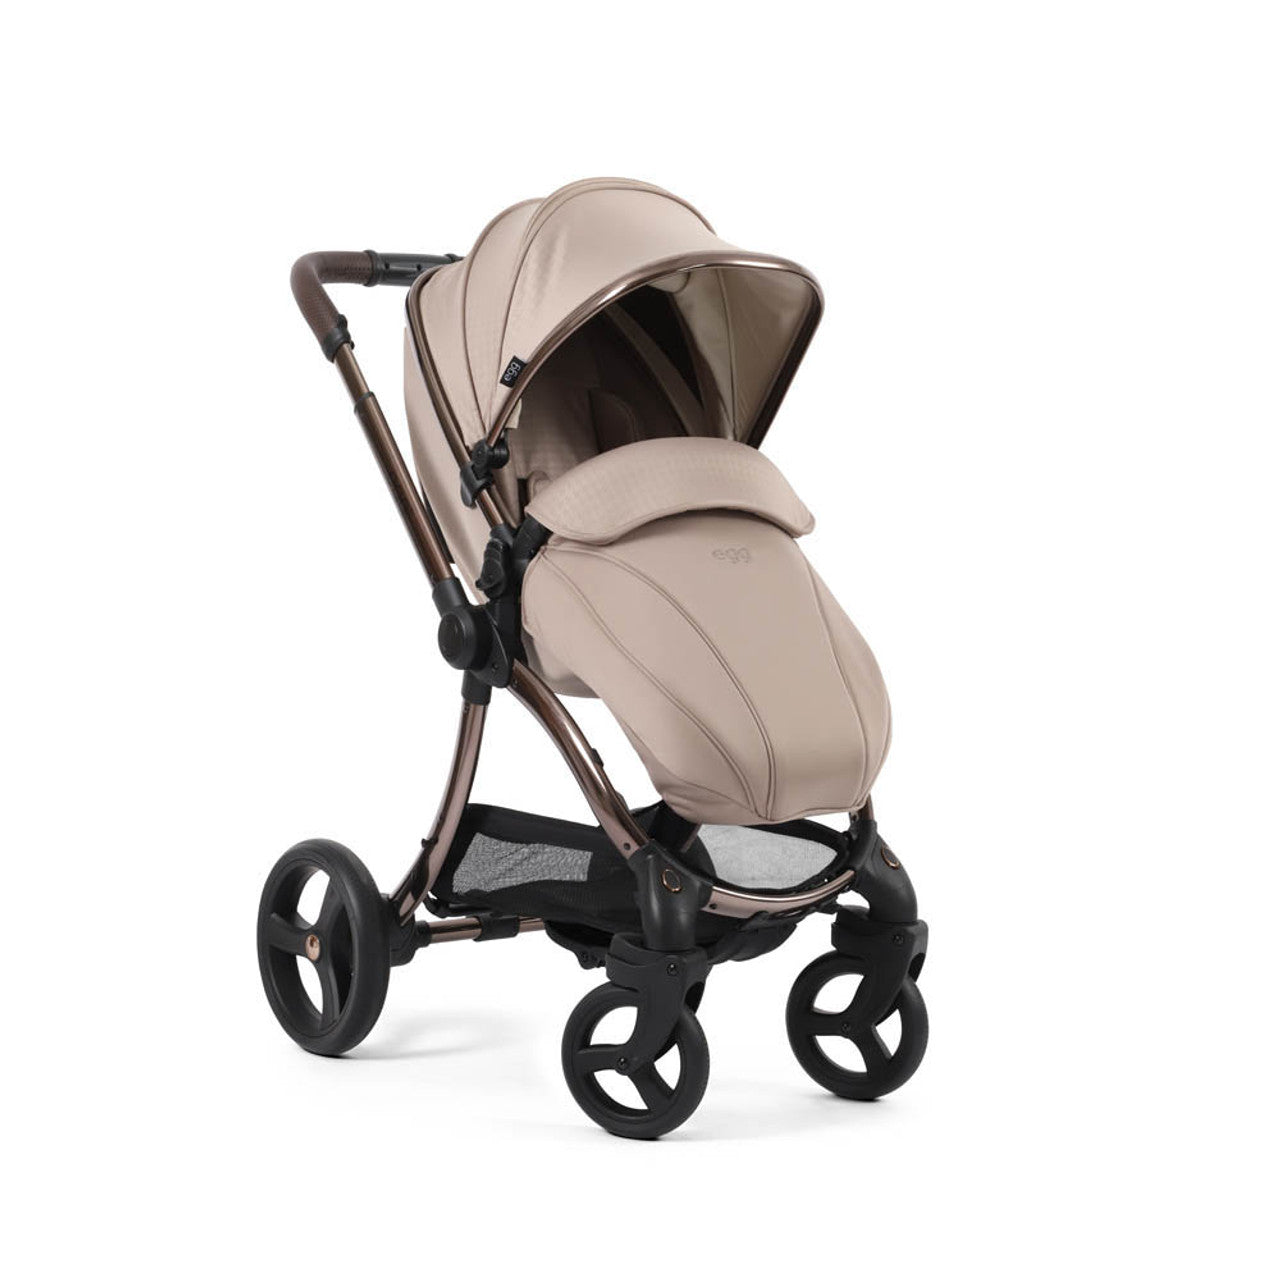 Egg® 3 Pushchair + Carrycot 2 in 1 Pram Special Edition - Houndstooth Almond -  | For Your Little One